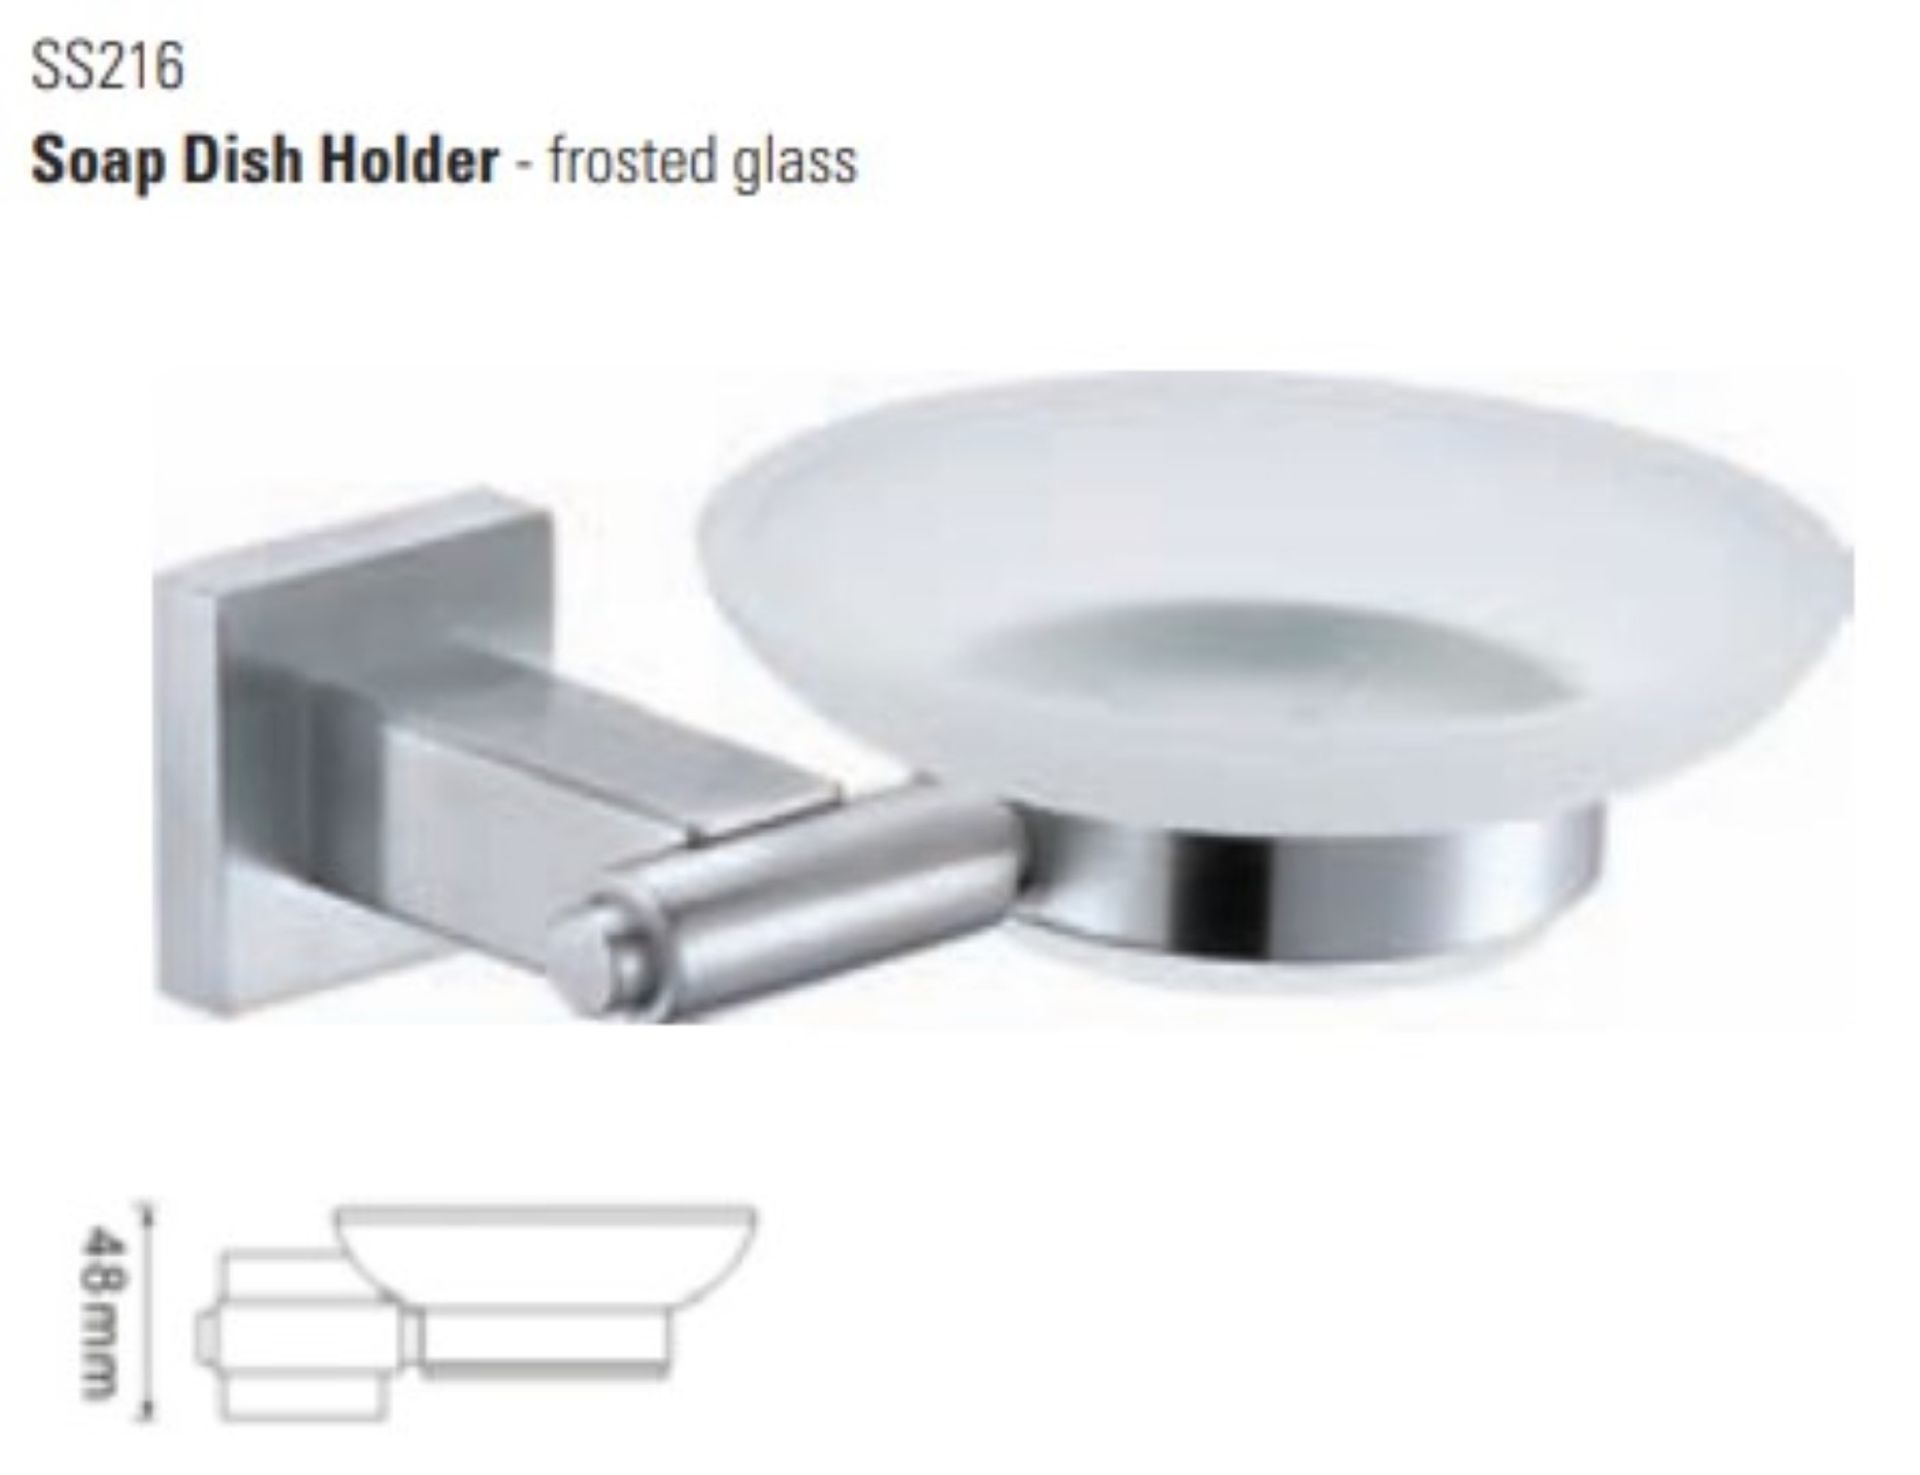 1 x Stonearth Soap Dish Holder With Frosted Glass - Solid Stainless Steel Bathroom Accessory - New - Image 2 of 2